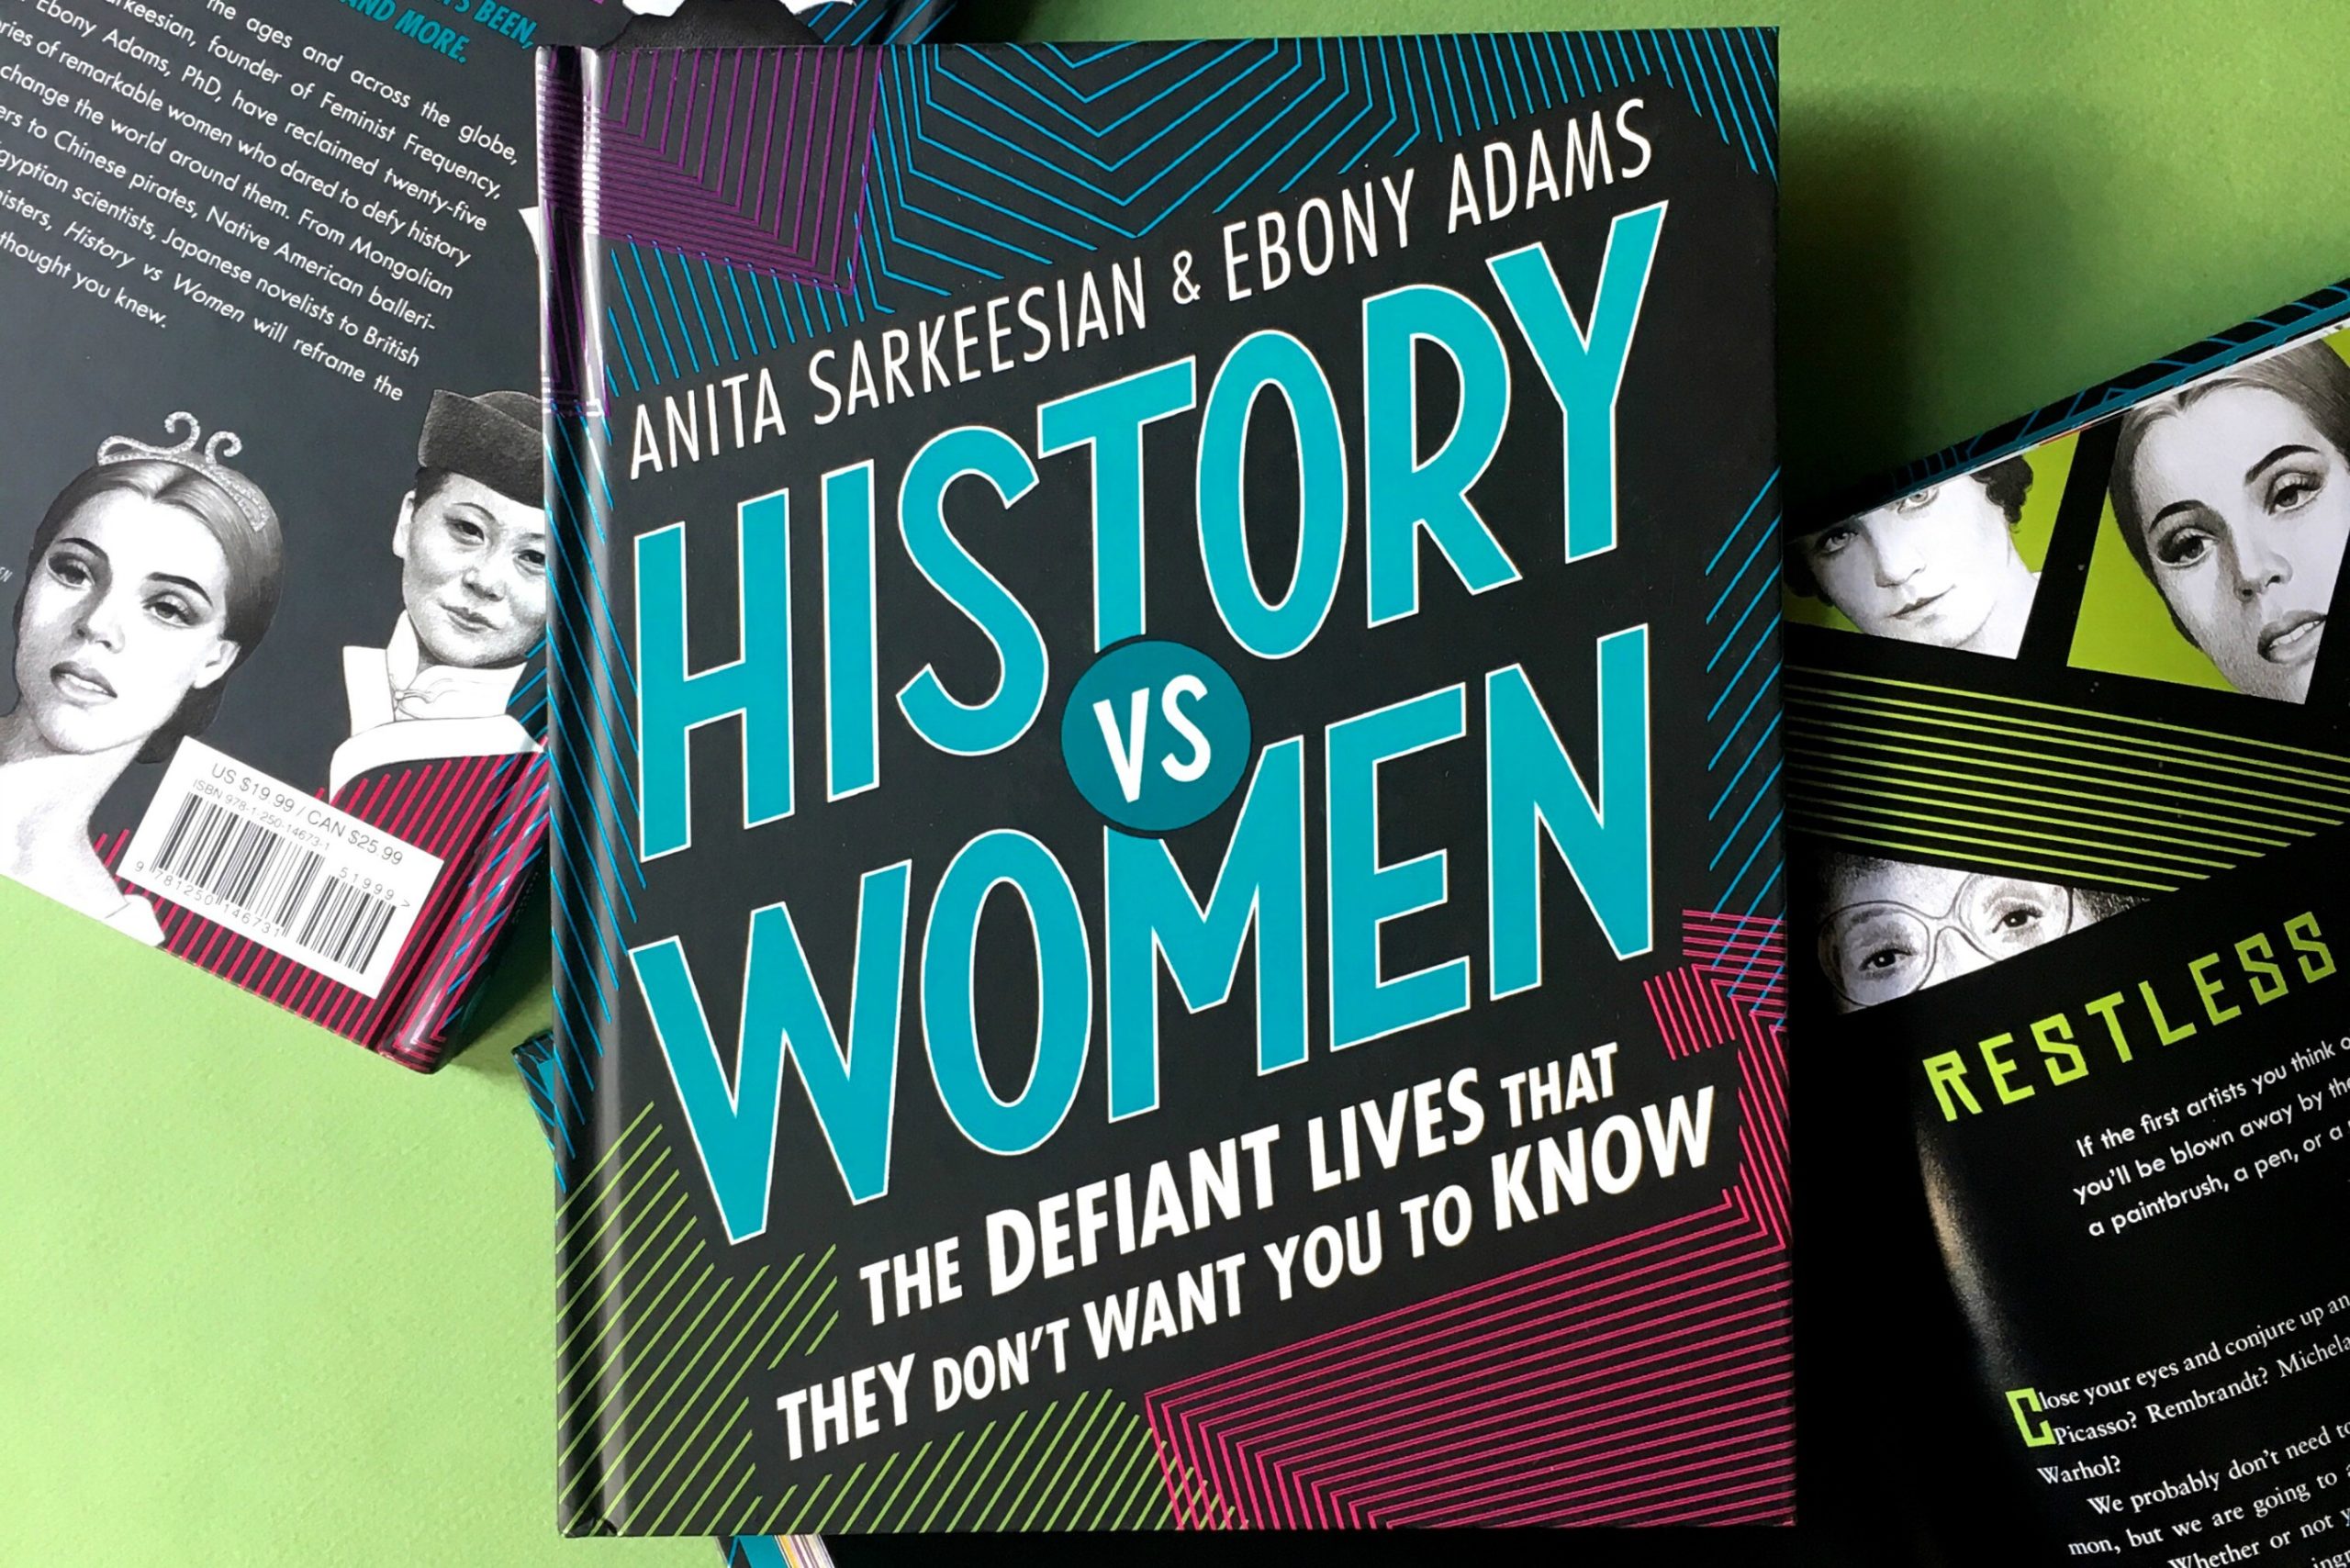 An Interview with Anita Sarkeesian and Ebony Adams, authors of History vs Women